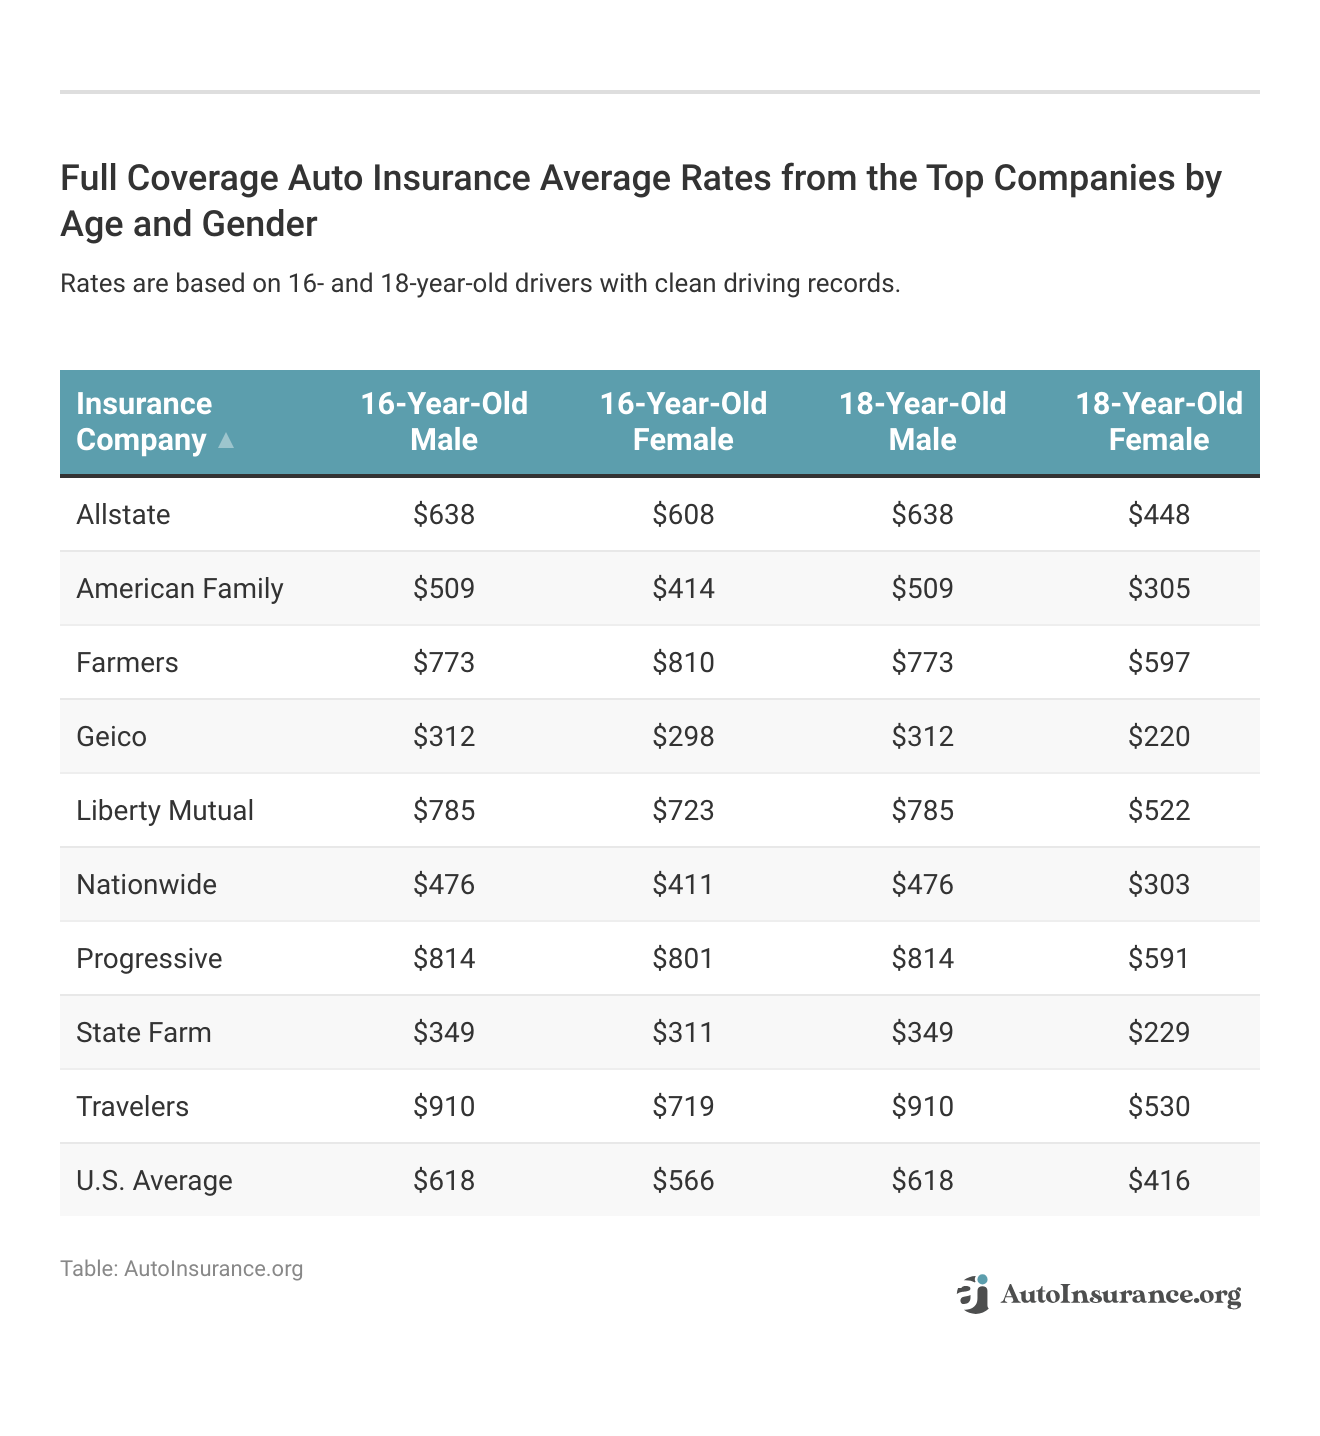 <h3>Full Coverage Auto Insurance Average Rates from the Top Companies by Age and Gender</h3>